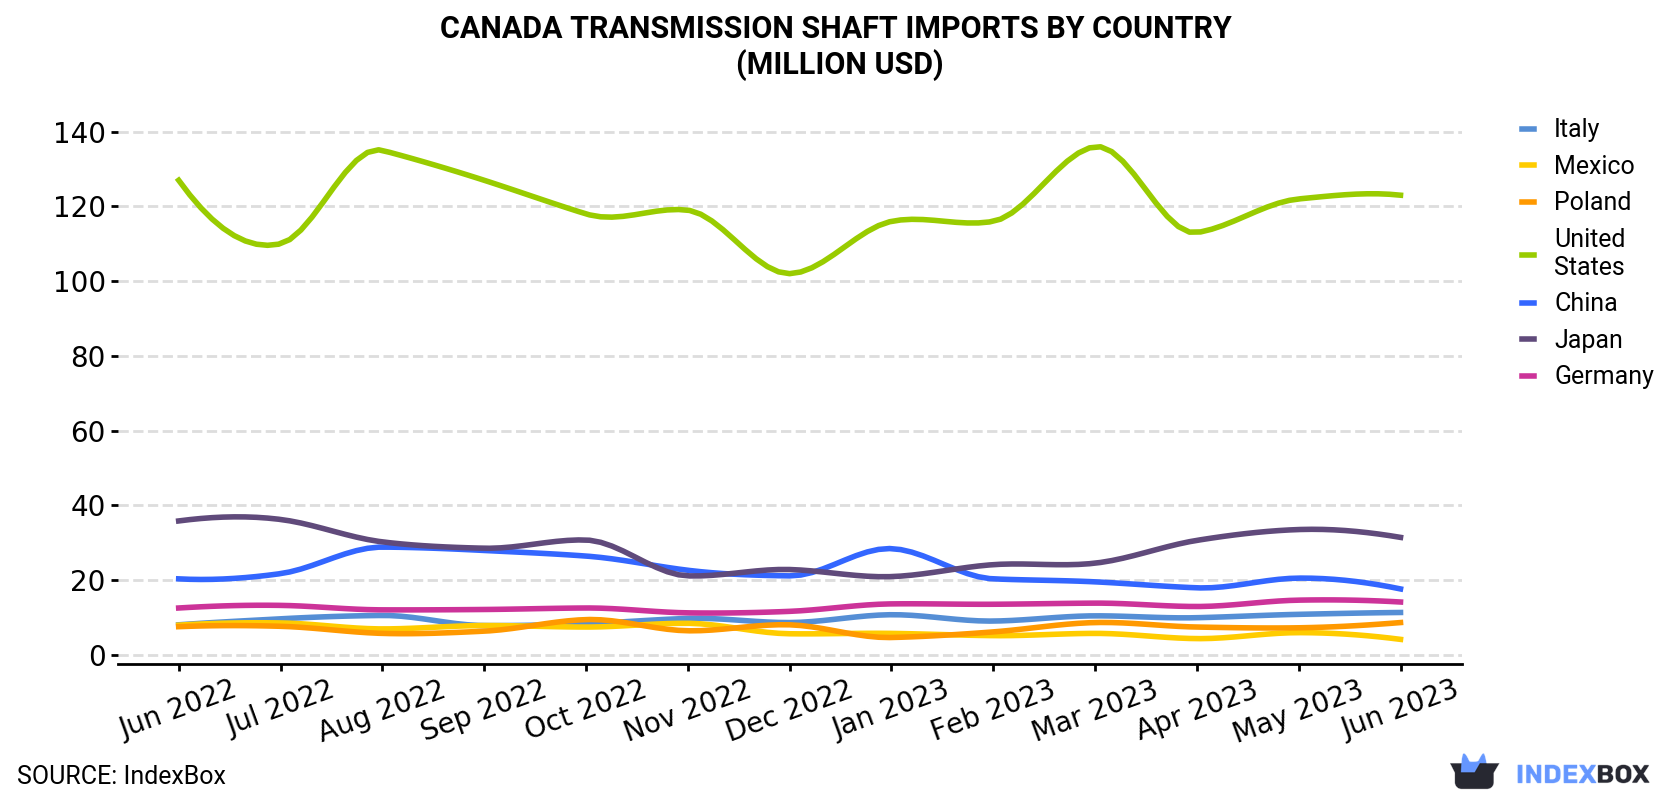 Canada Transmission Shaft Imports By Country (Million USD)